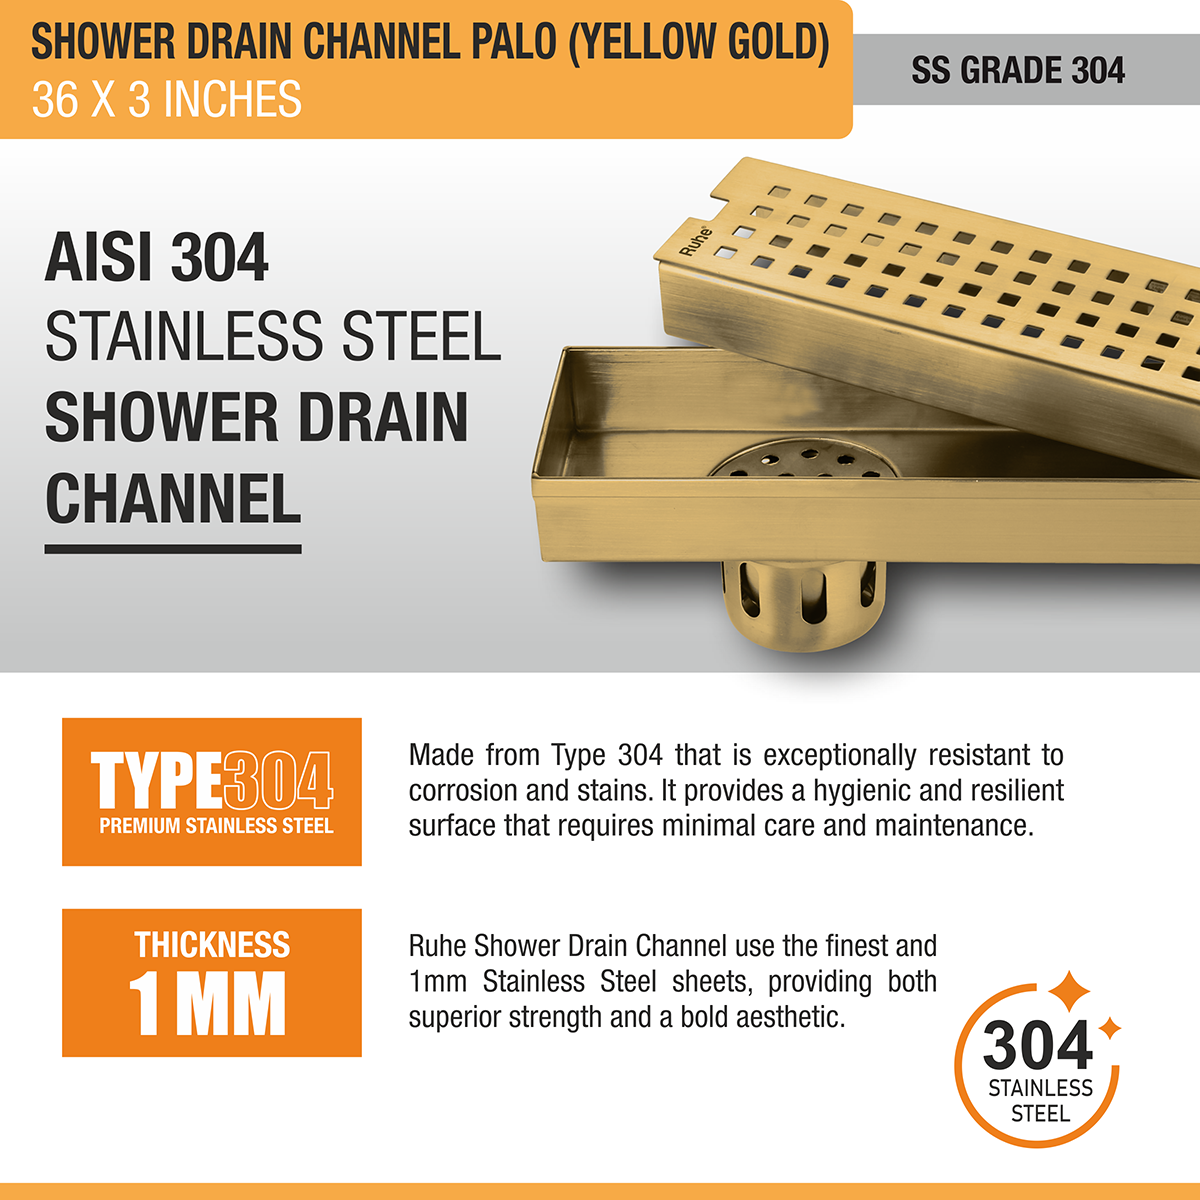 Palo Shower Drain Channel (36 x 3 Inches) YELLOW GOLD stainless steel